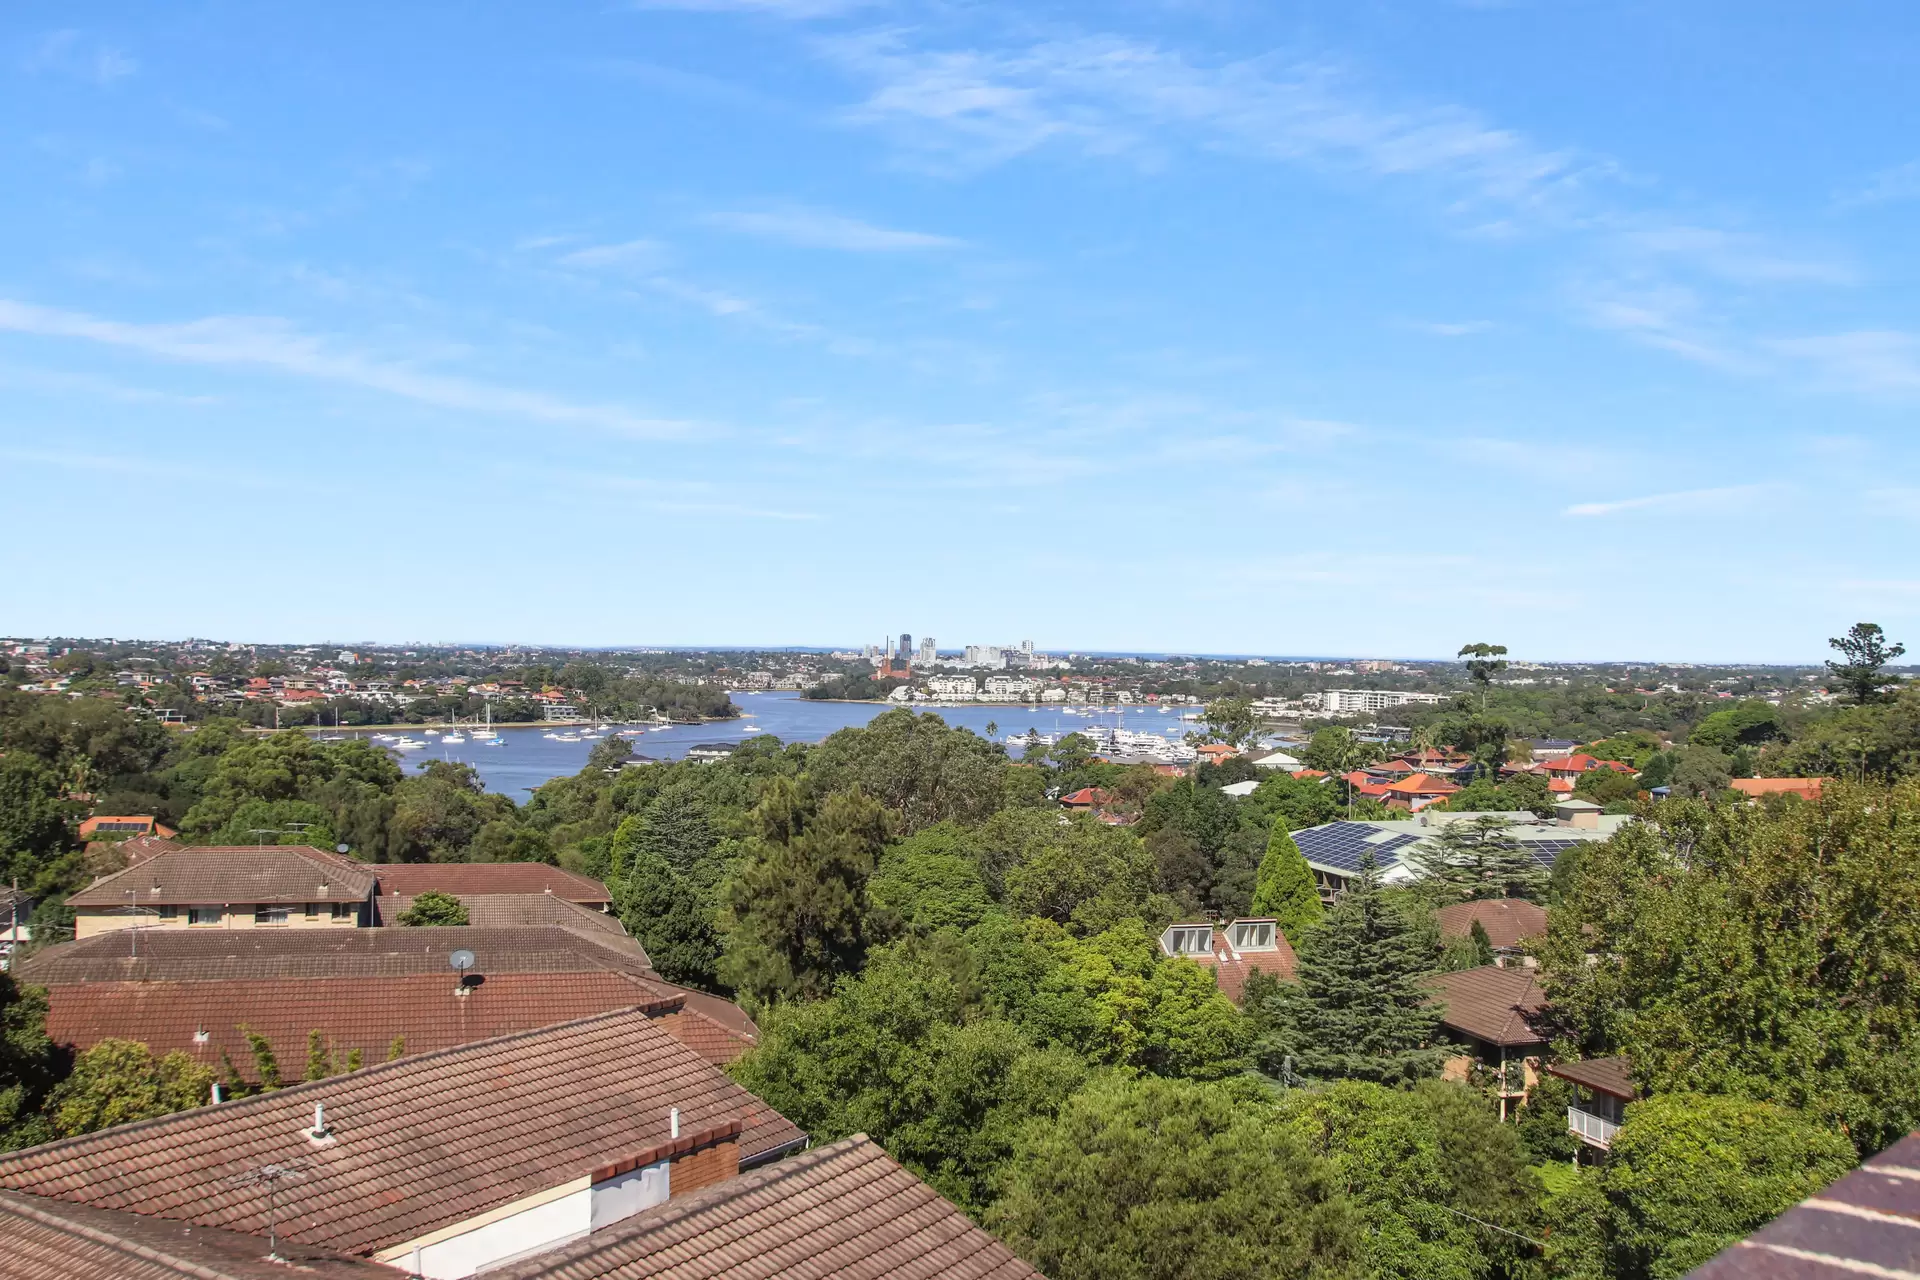 8/120 Victoria Road, Gladesville For Lease by Cassidy Real Estate - image 1